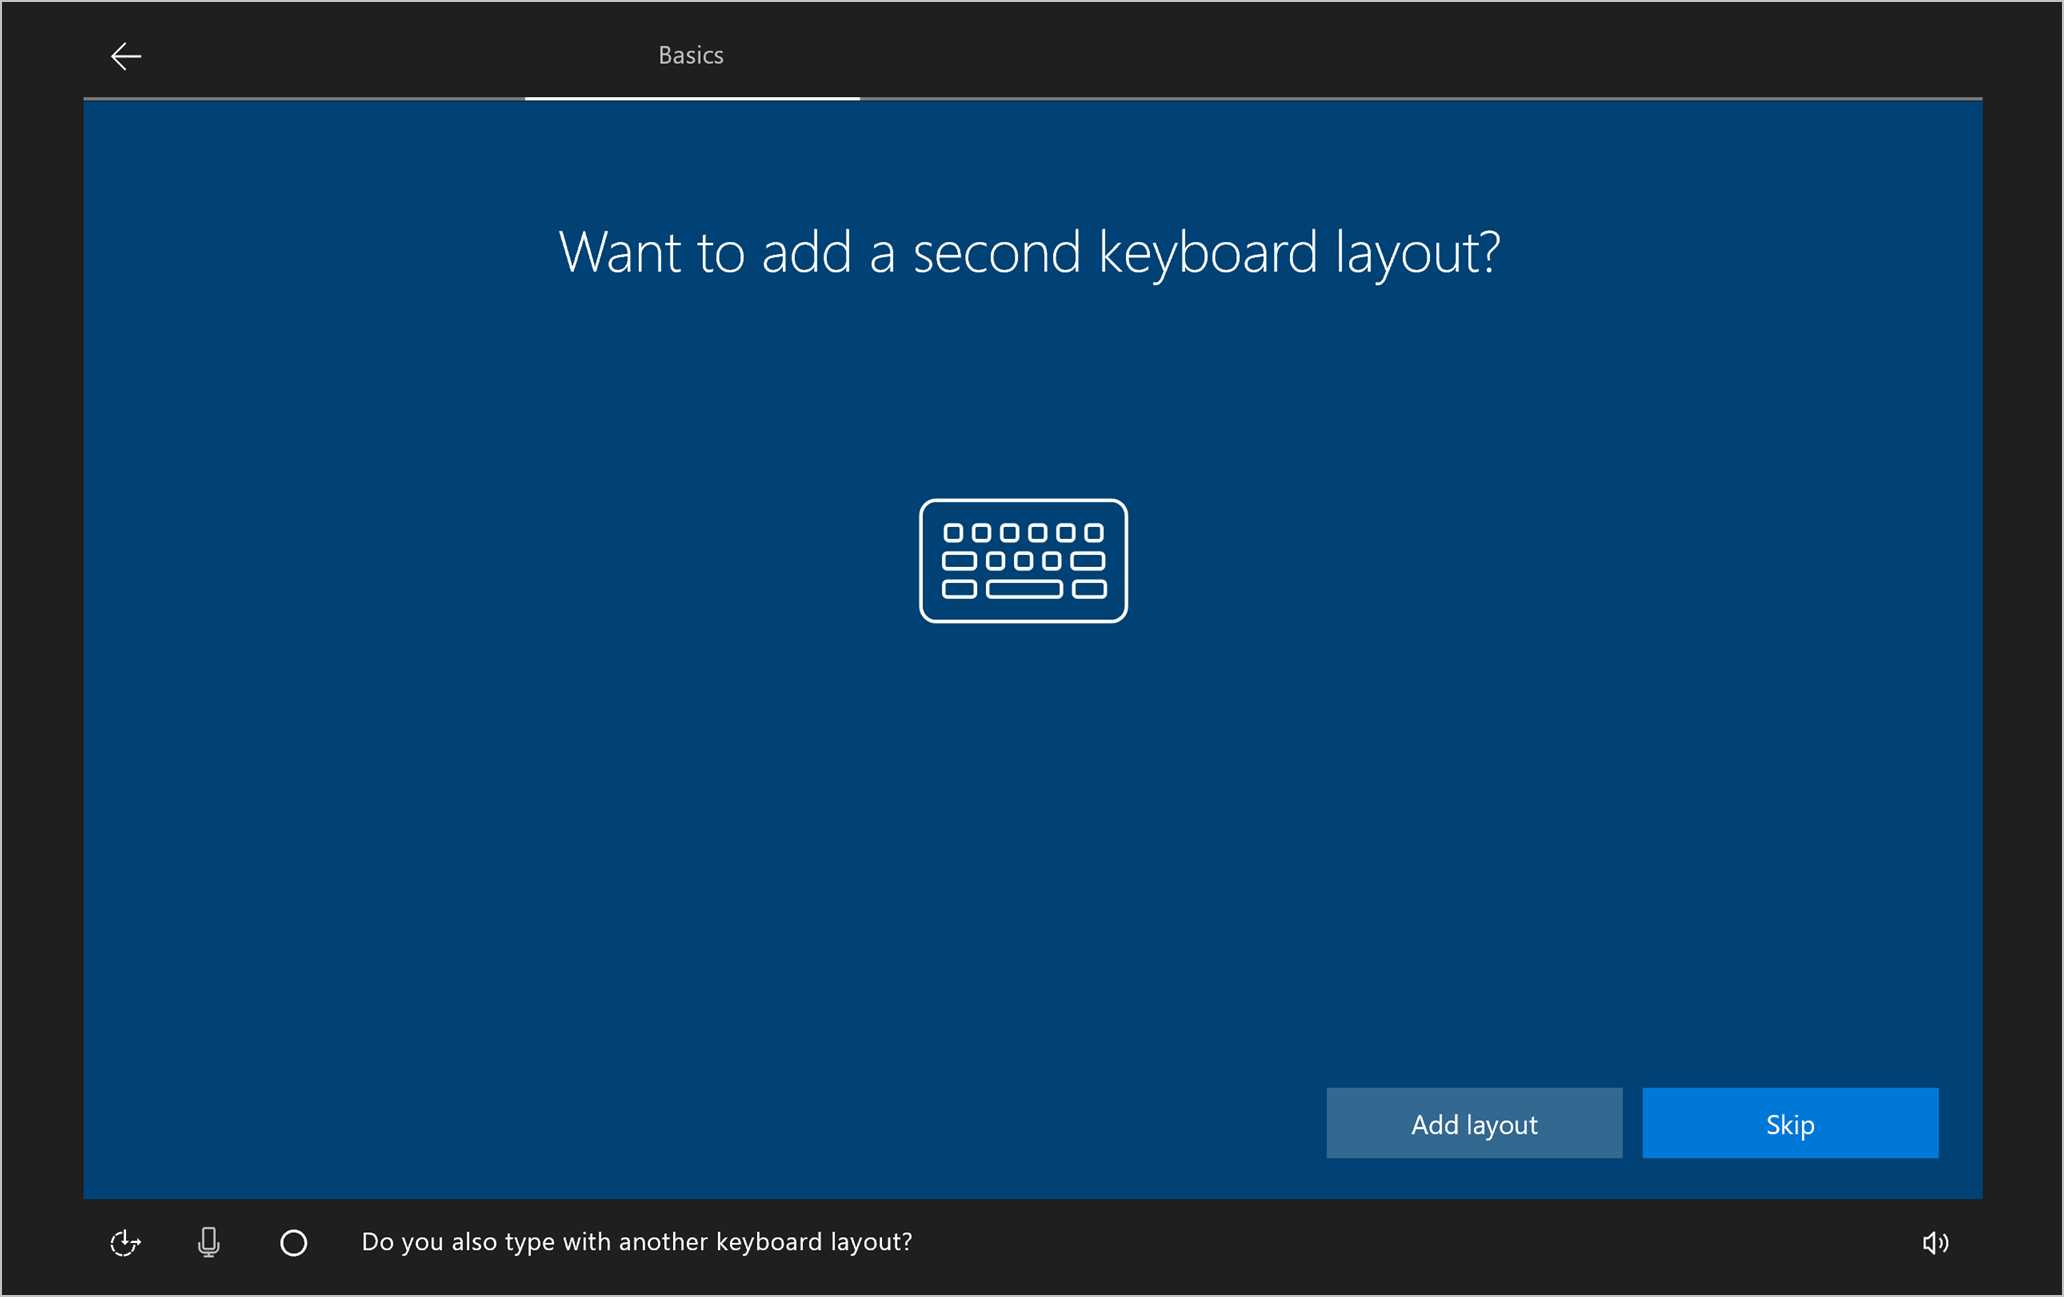 Example screenshot of the second keyboard layout screen, with options to Add layout and Skip in lower-right corner.